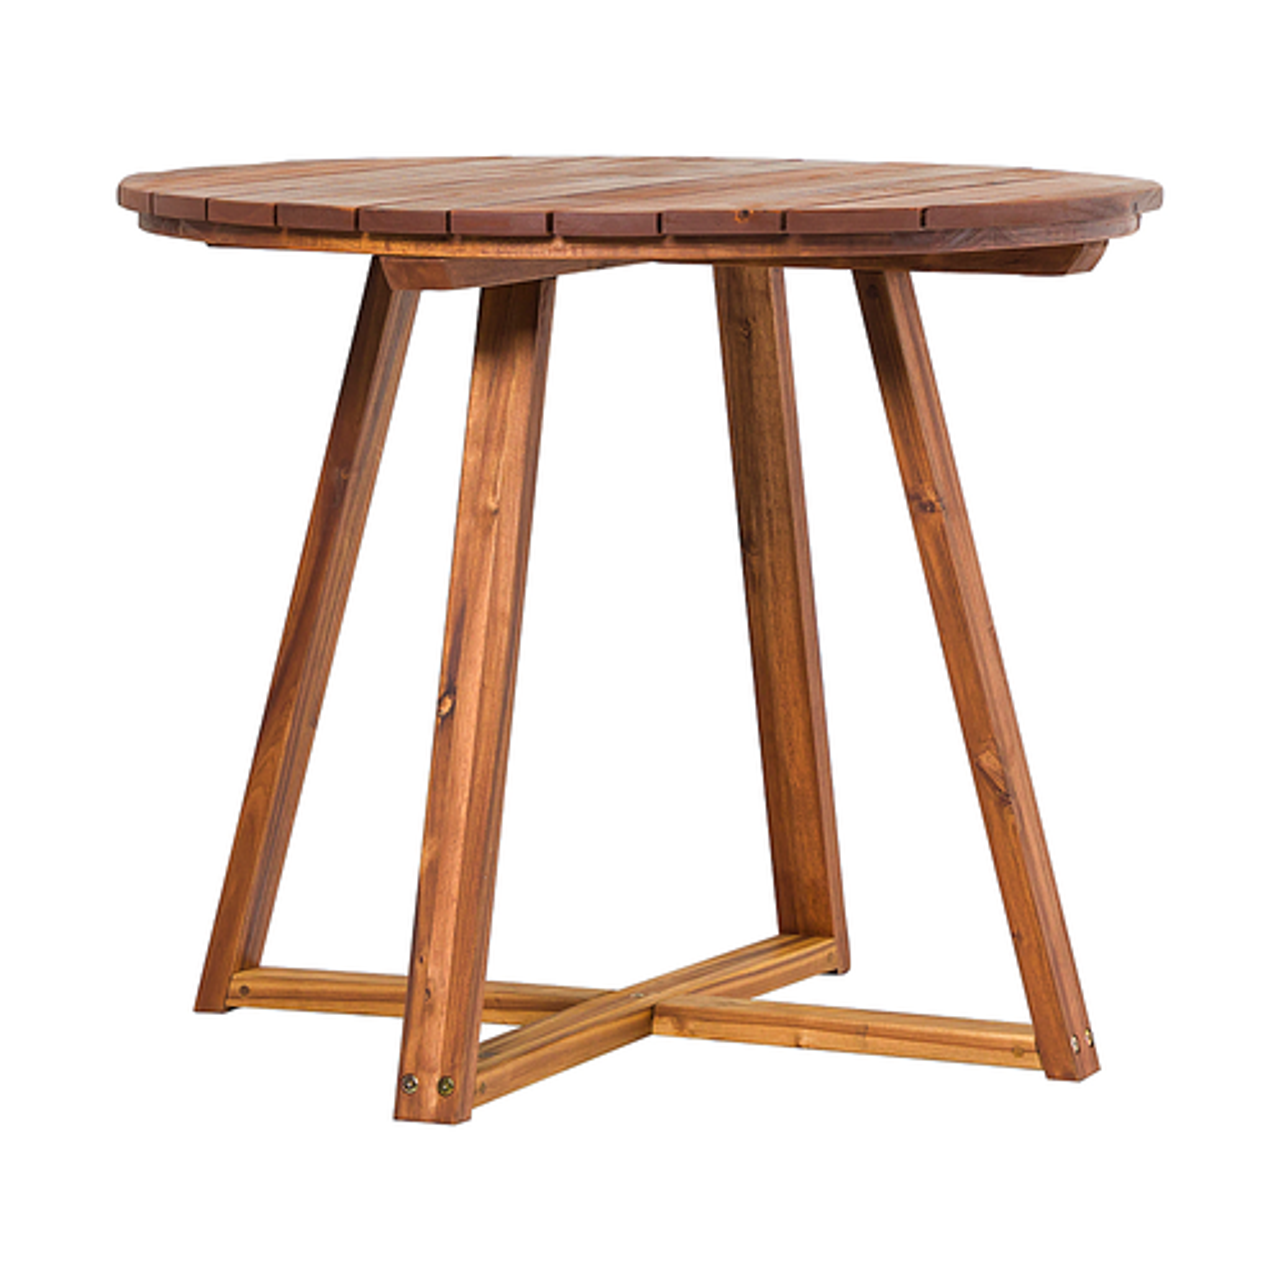 Walker Edison - Modern Solid Acacia Wood Round Outdoor Dining Table - Brown